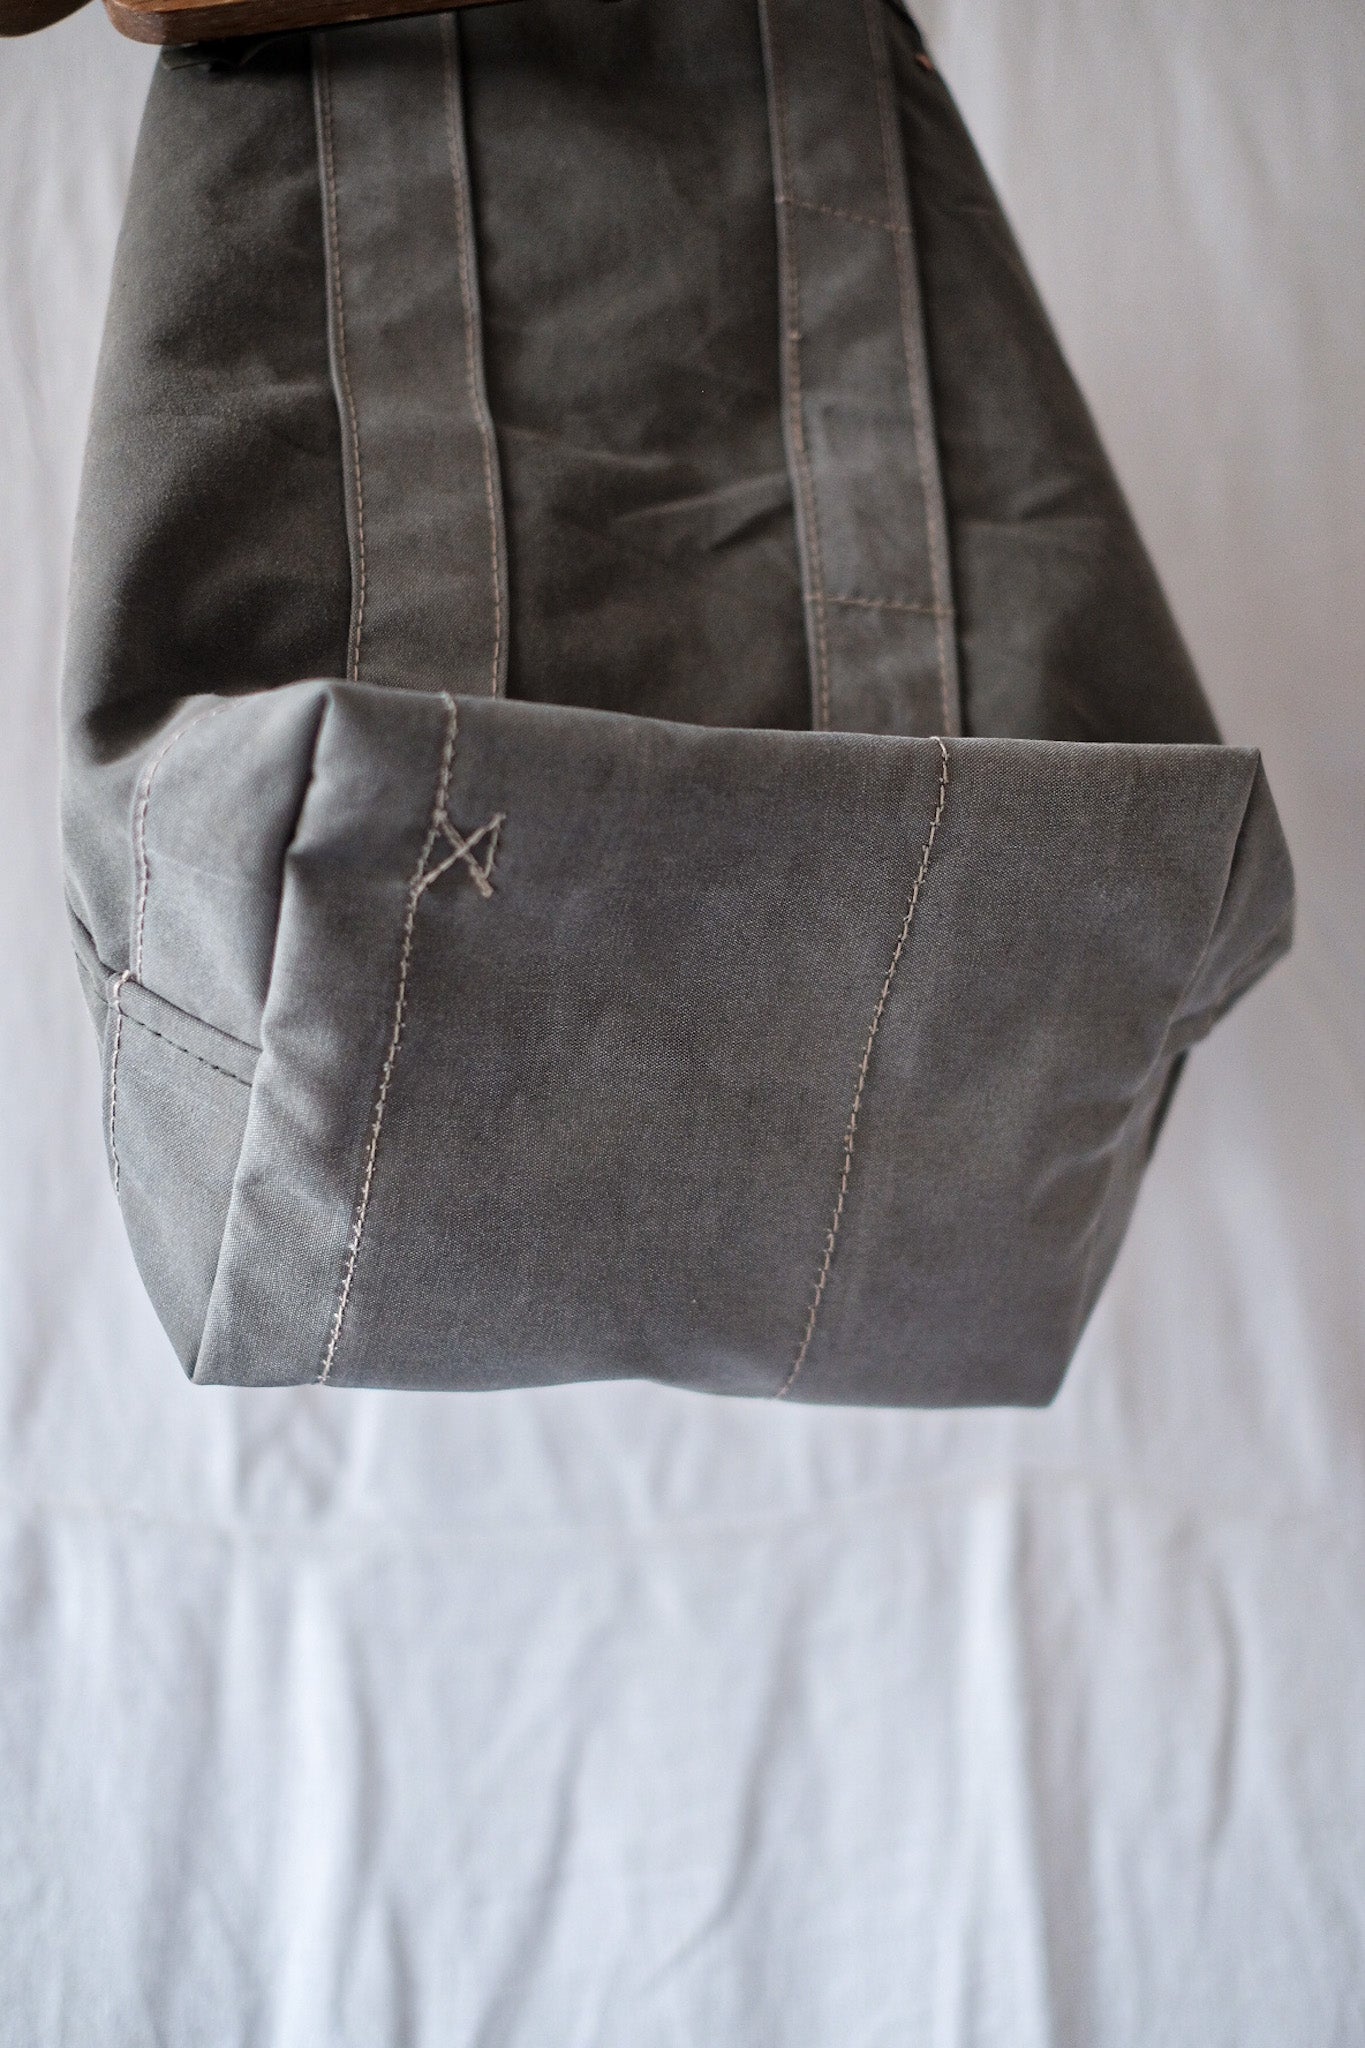 [~ 50's] French Tote Bag "Tente Tend"